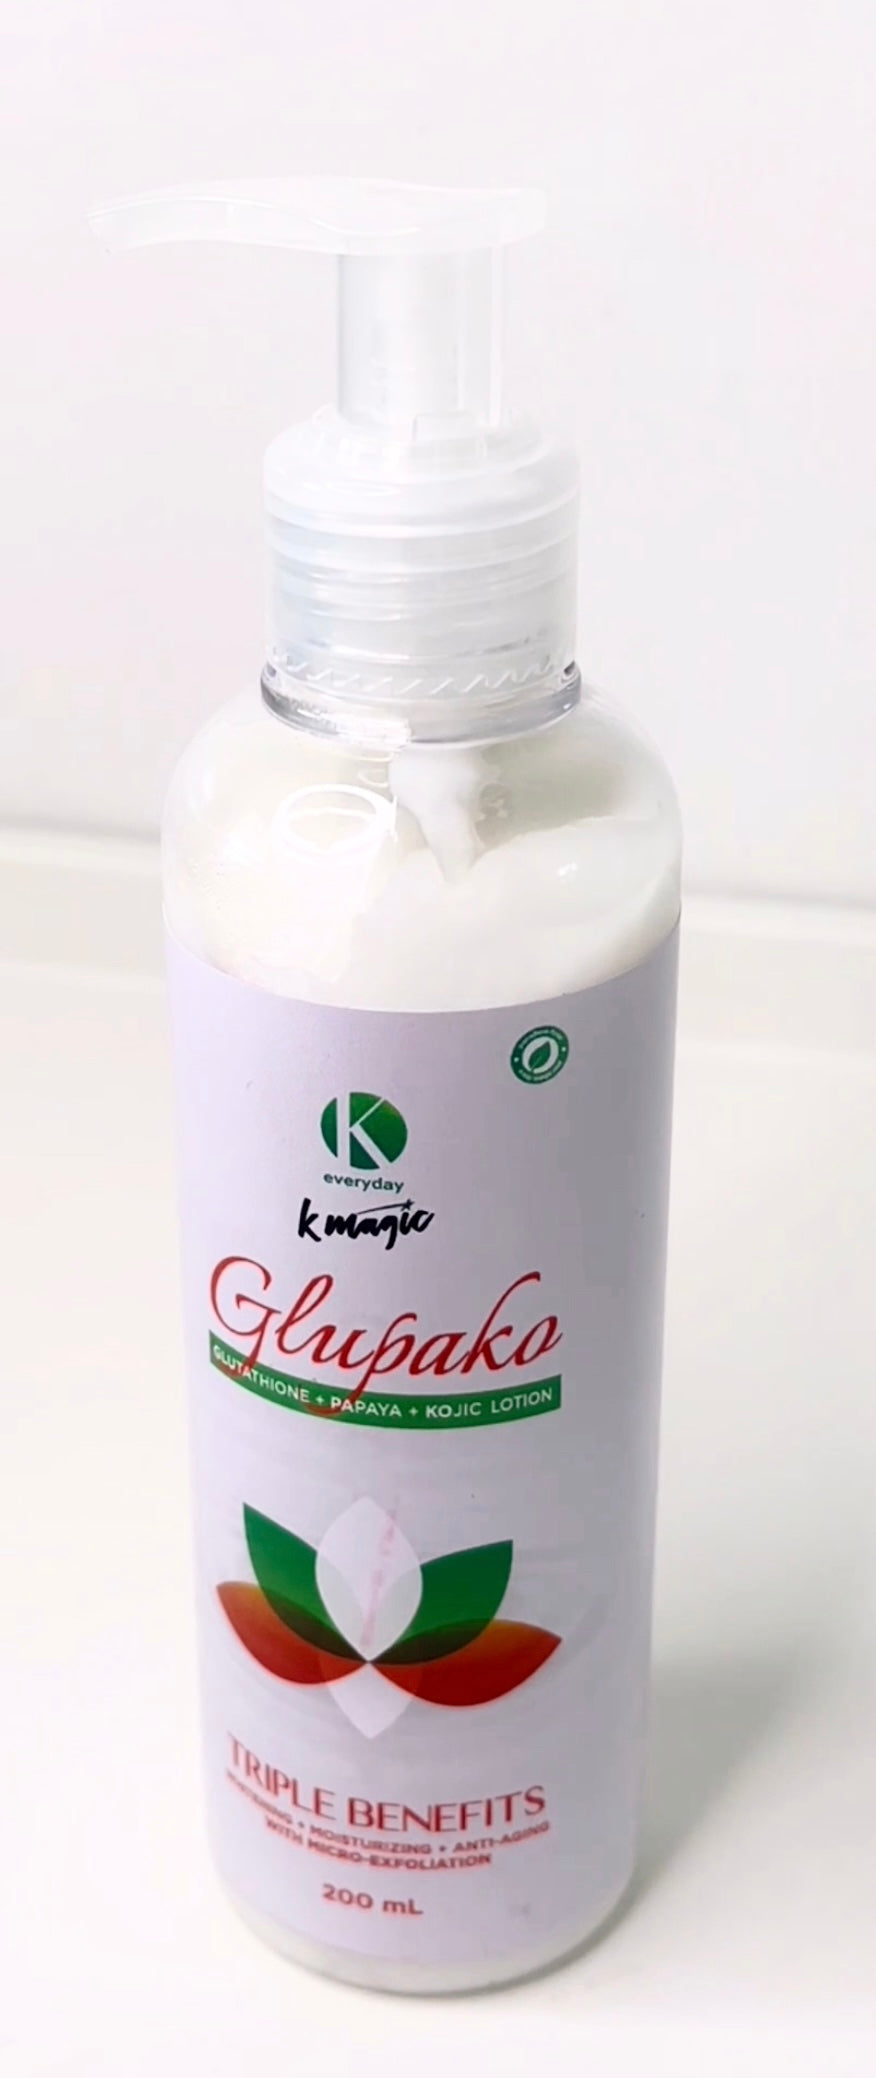 This is a GluPaKo Body Lotion